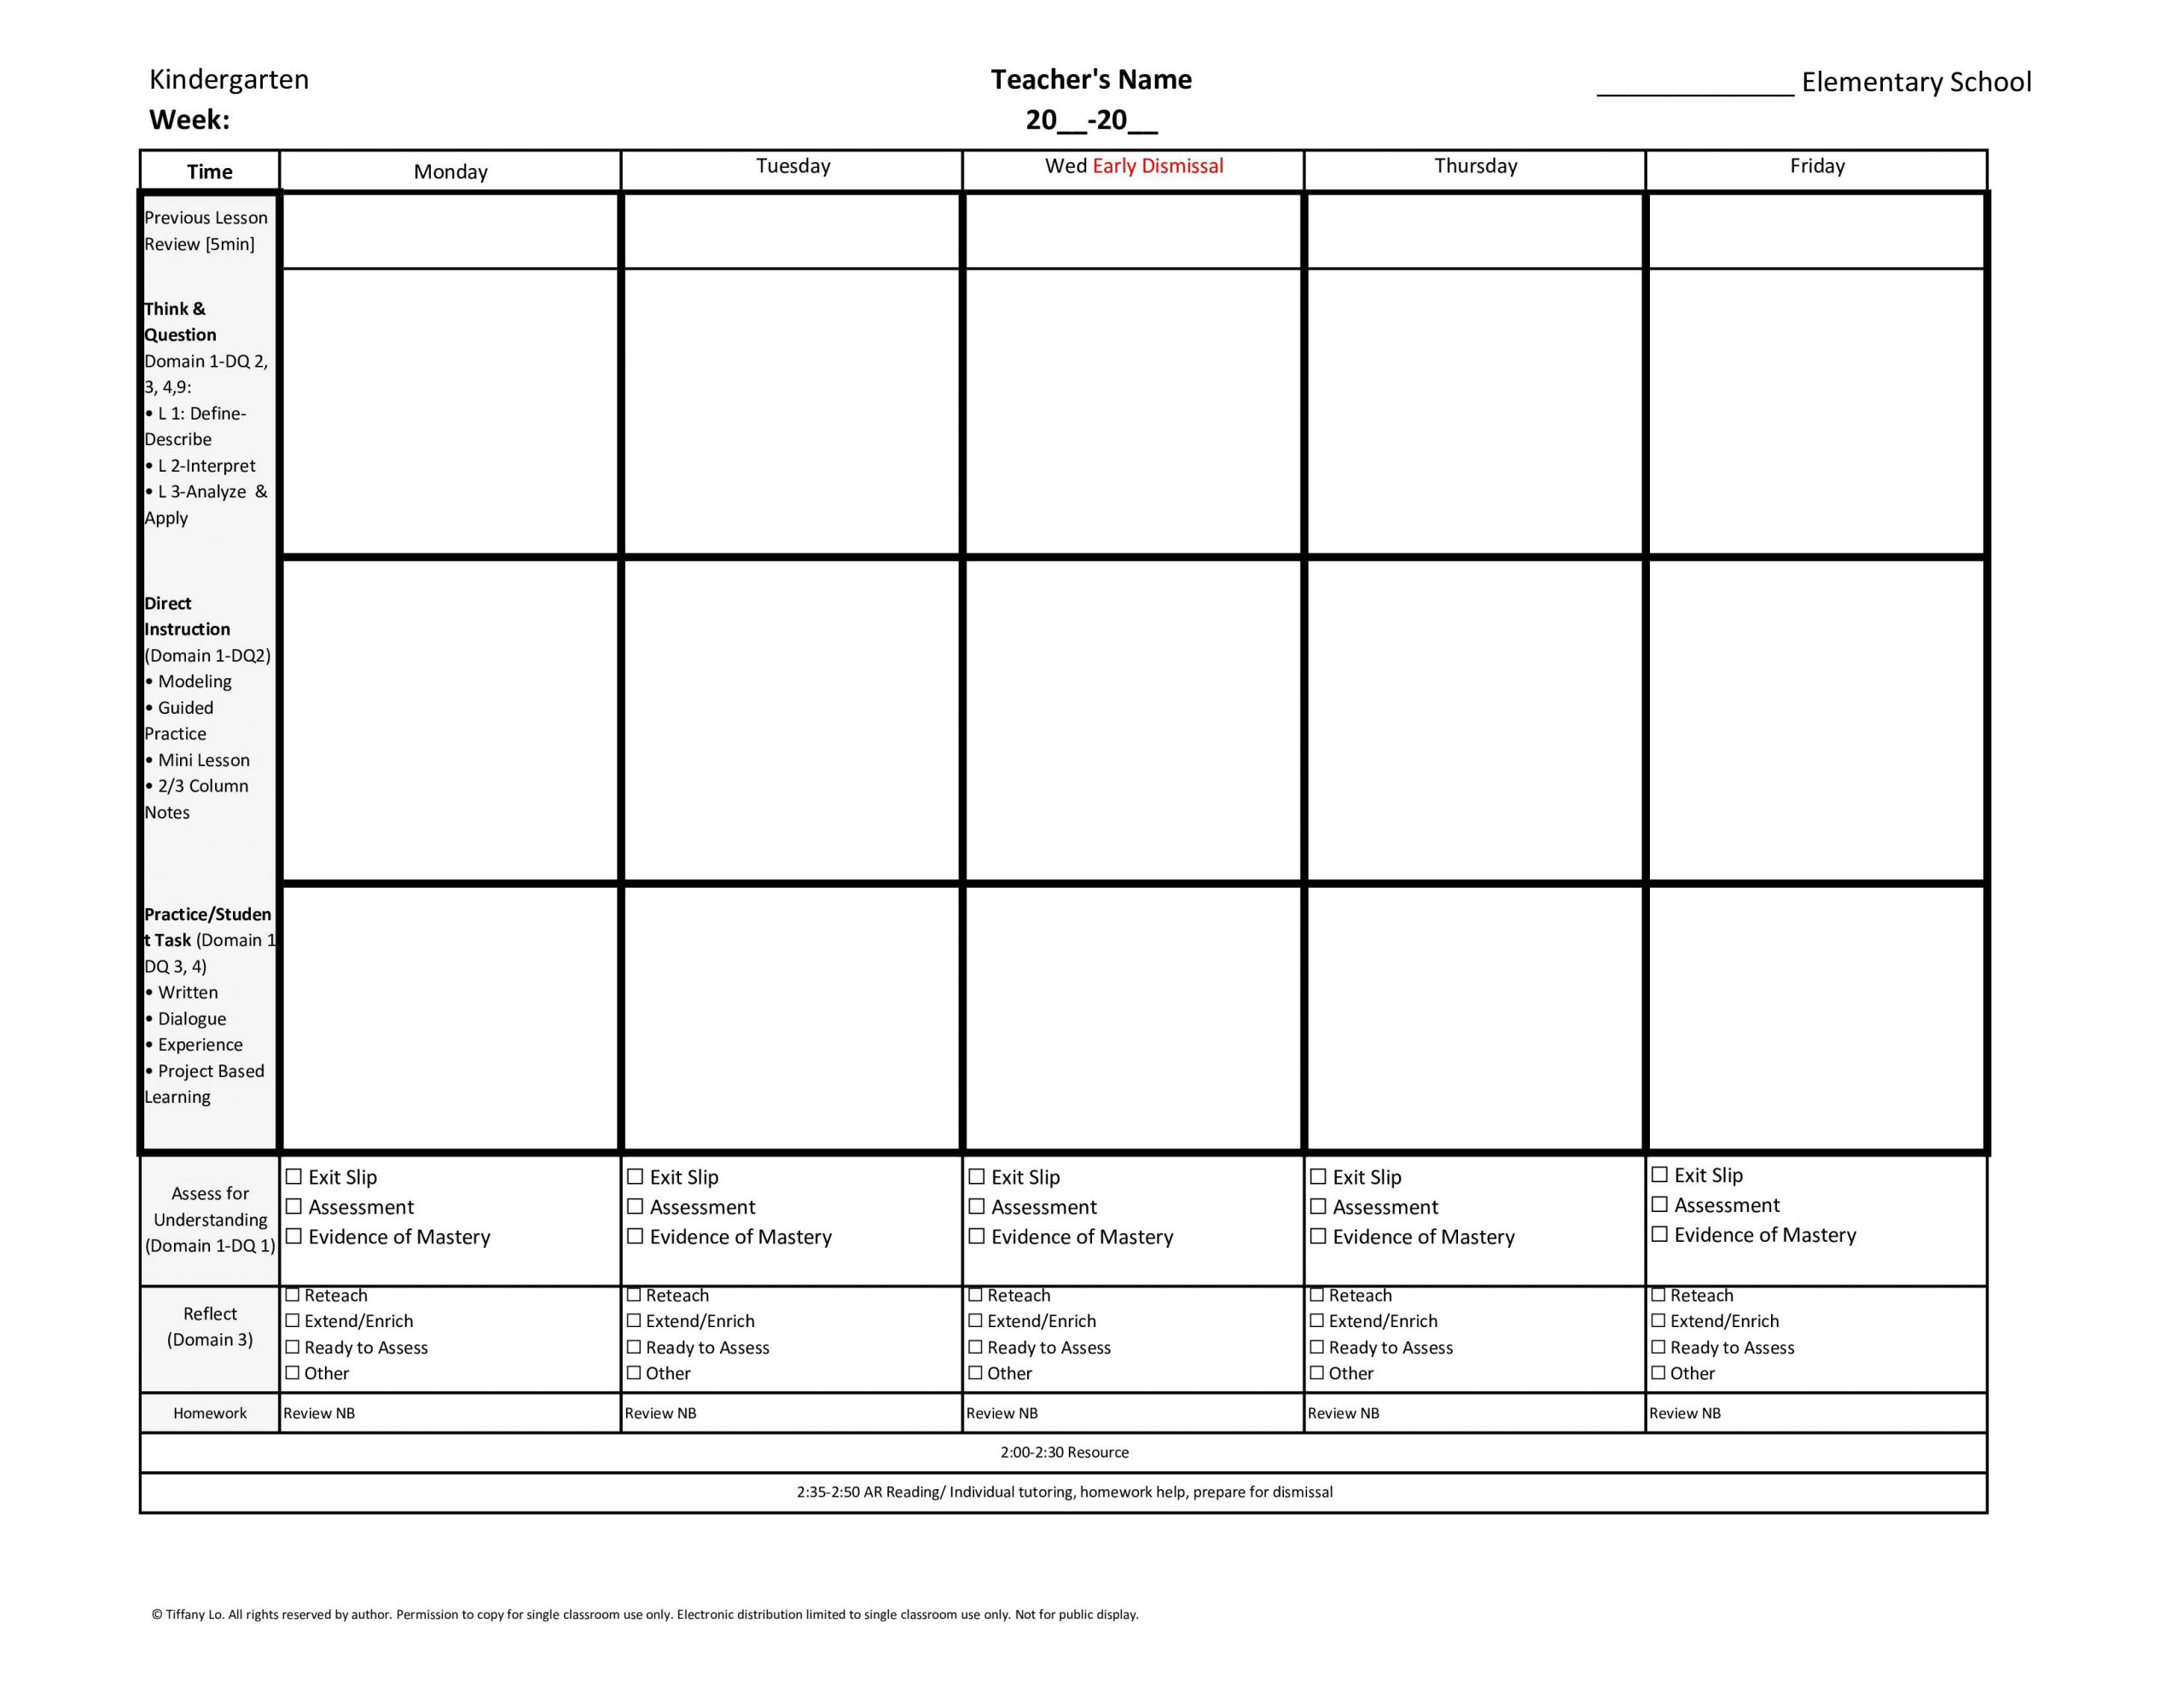 Kindergarten Common Core Weekly Lesson Plan Template W/ Drop Down Lists